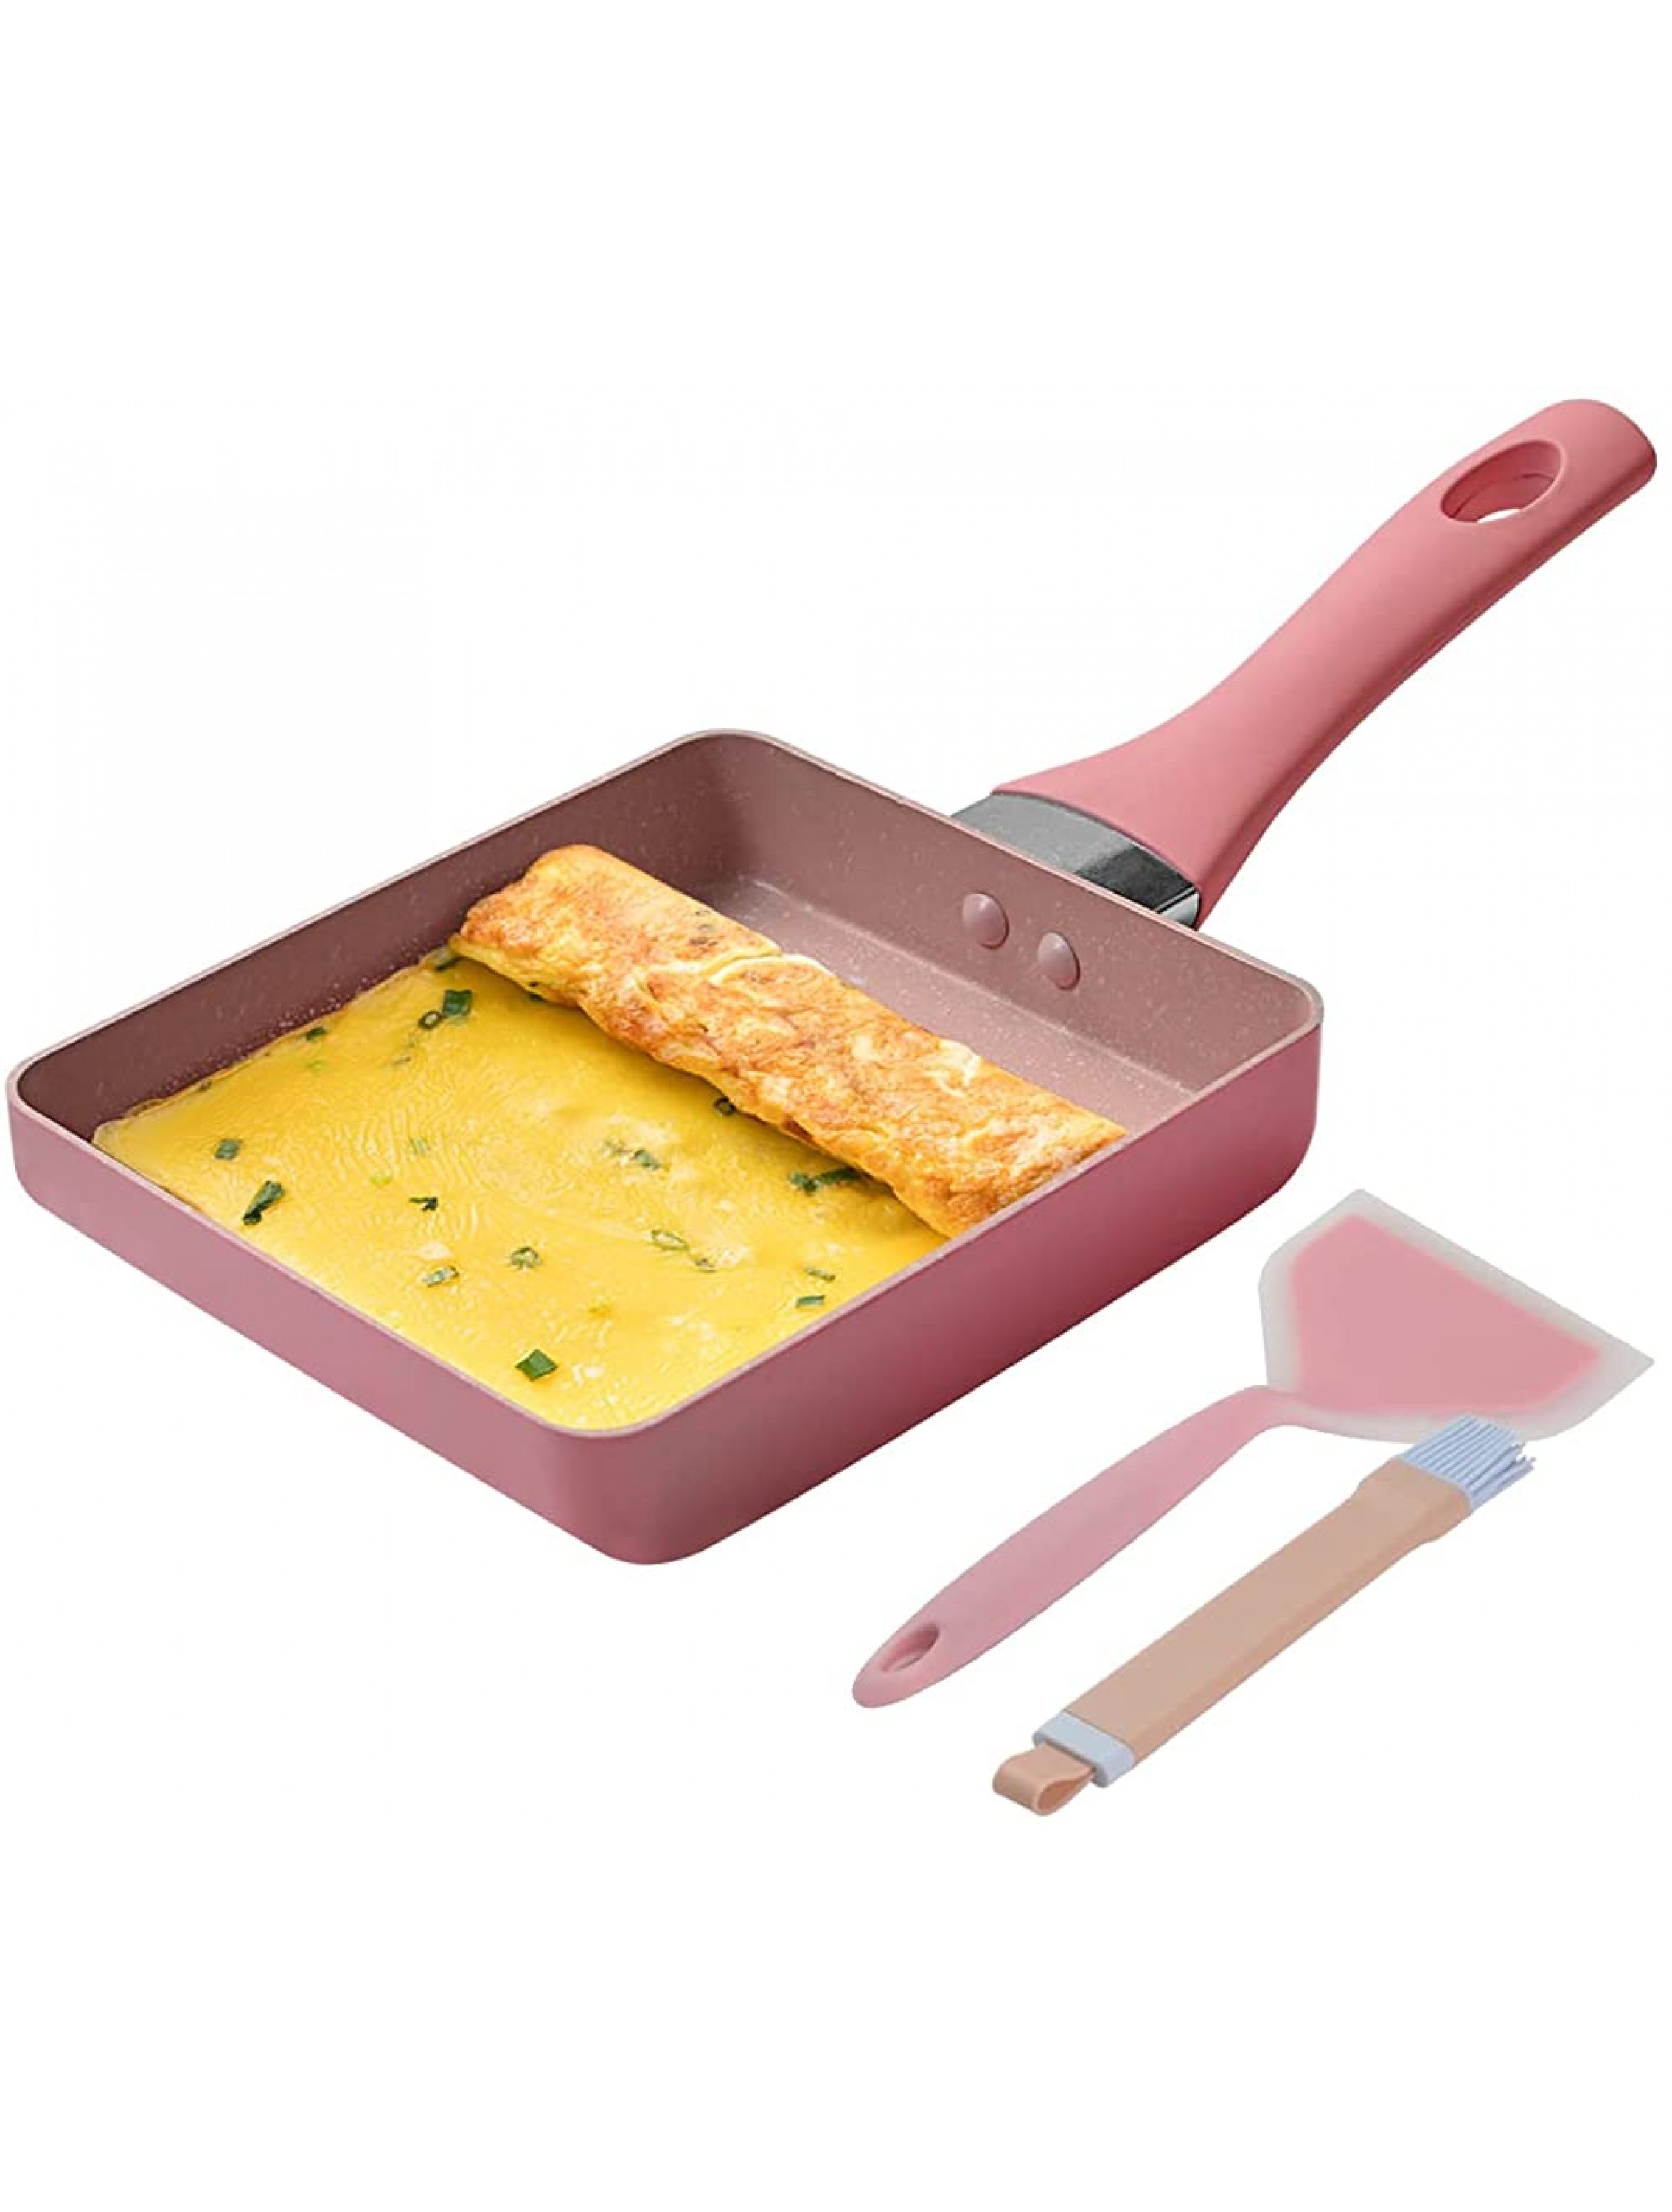 Funland Tamagoyaki Pan Nonstcik Japanese Omelette Egg Pan 7’’x 6’’ Small Square Frying with Silicone Spatula & Brush Pink - BWLPWTPTL